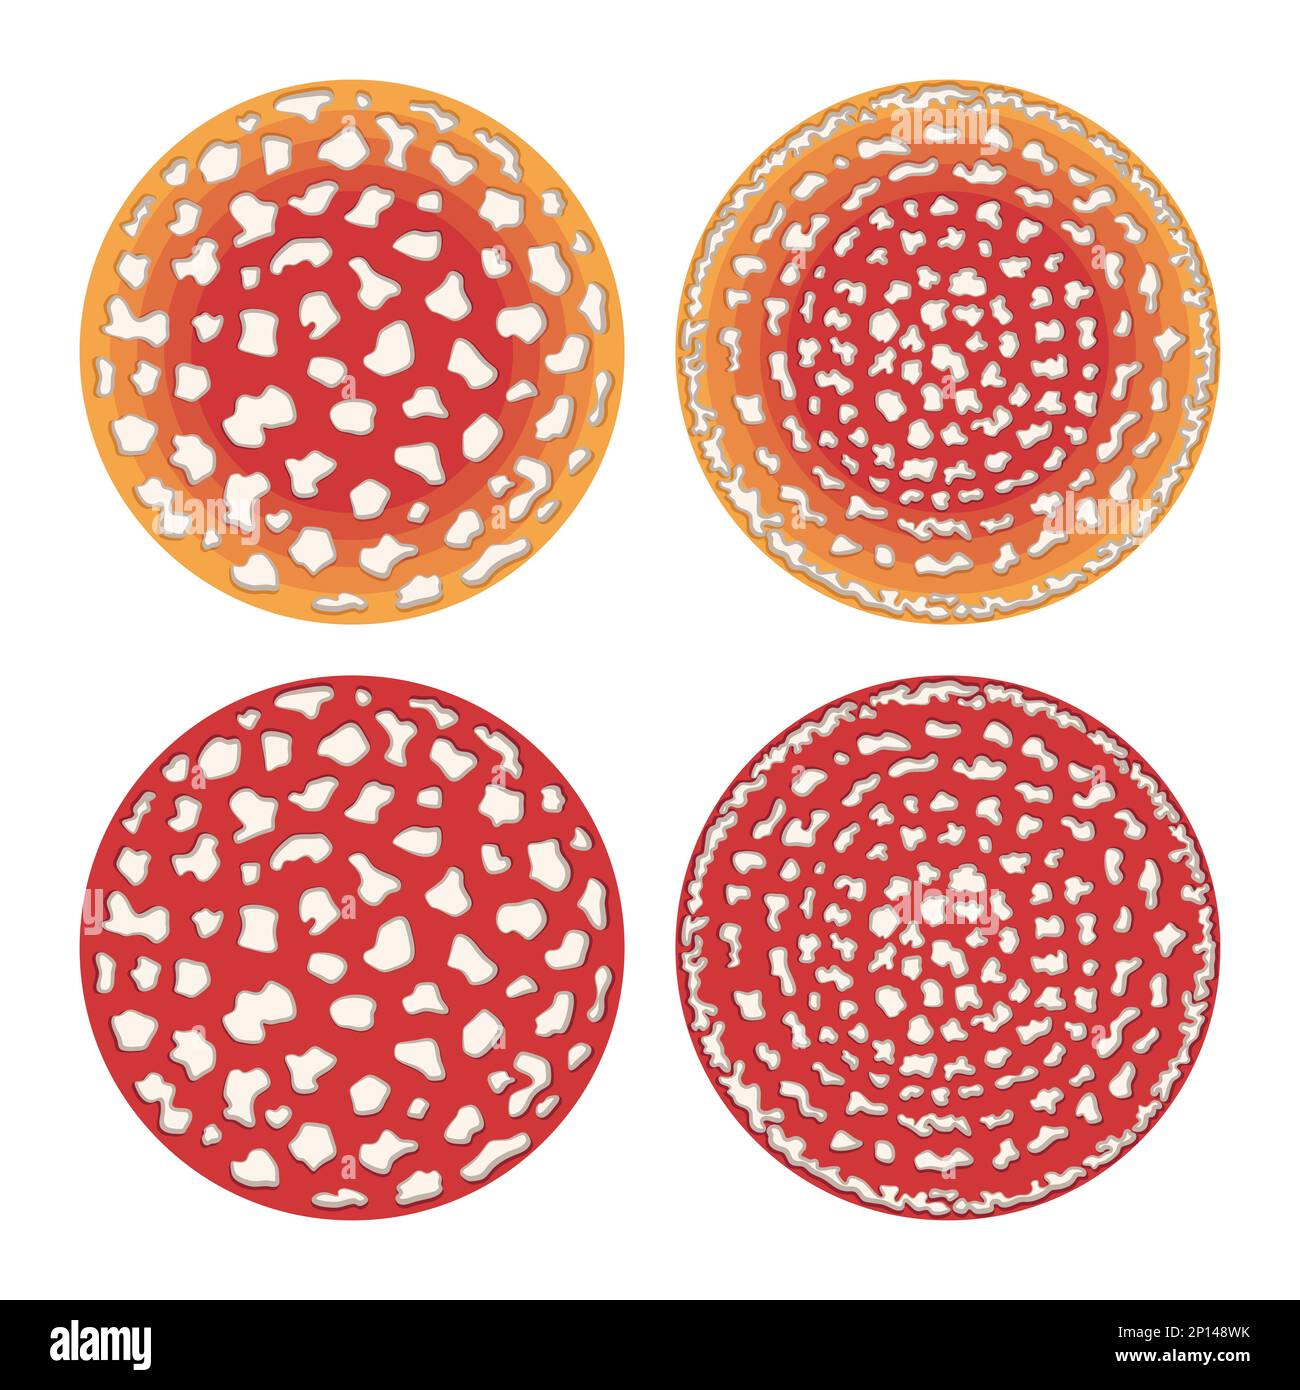 Set of color illustration with fly agaric mushroom caps. Isolated vector objects on white background. Stock Vector